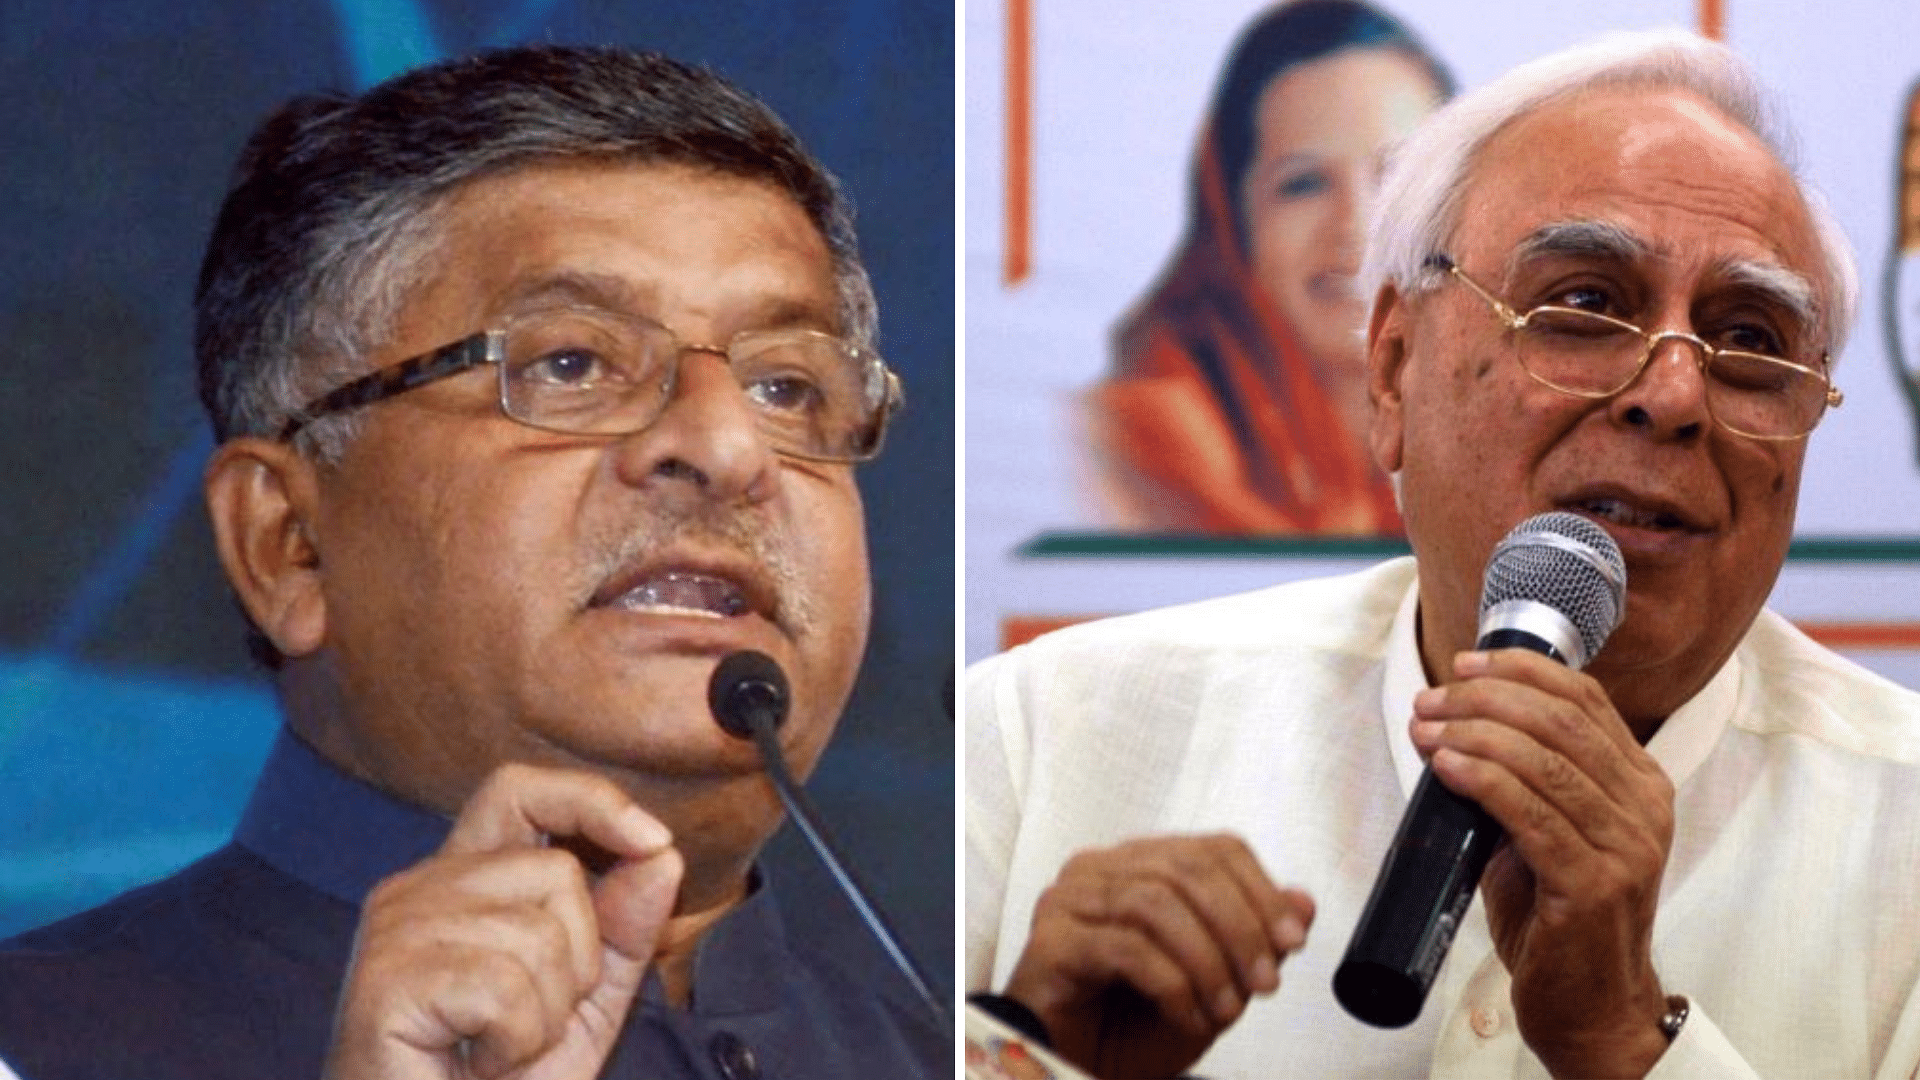 Ravi Shankar Prasad asked if the event was sponsored by the Congress to “defame the popular mandate” of India.